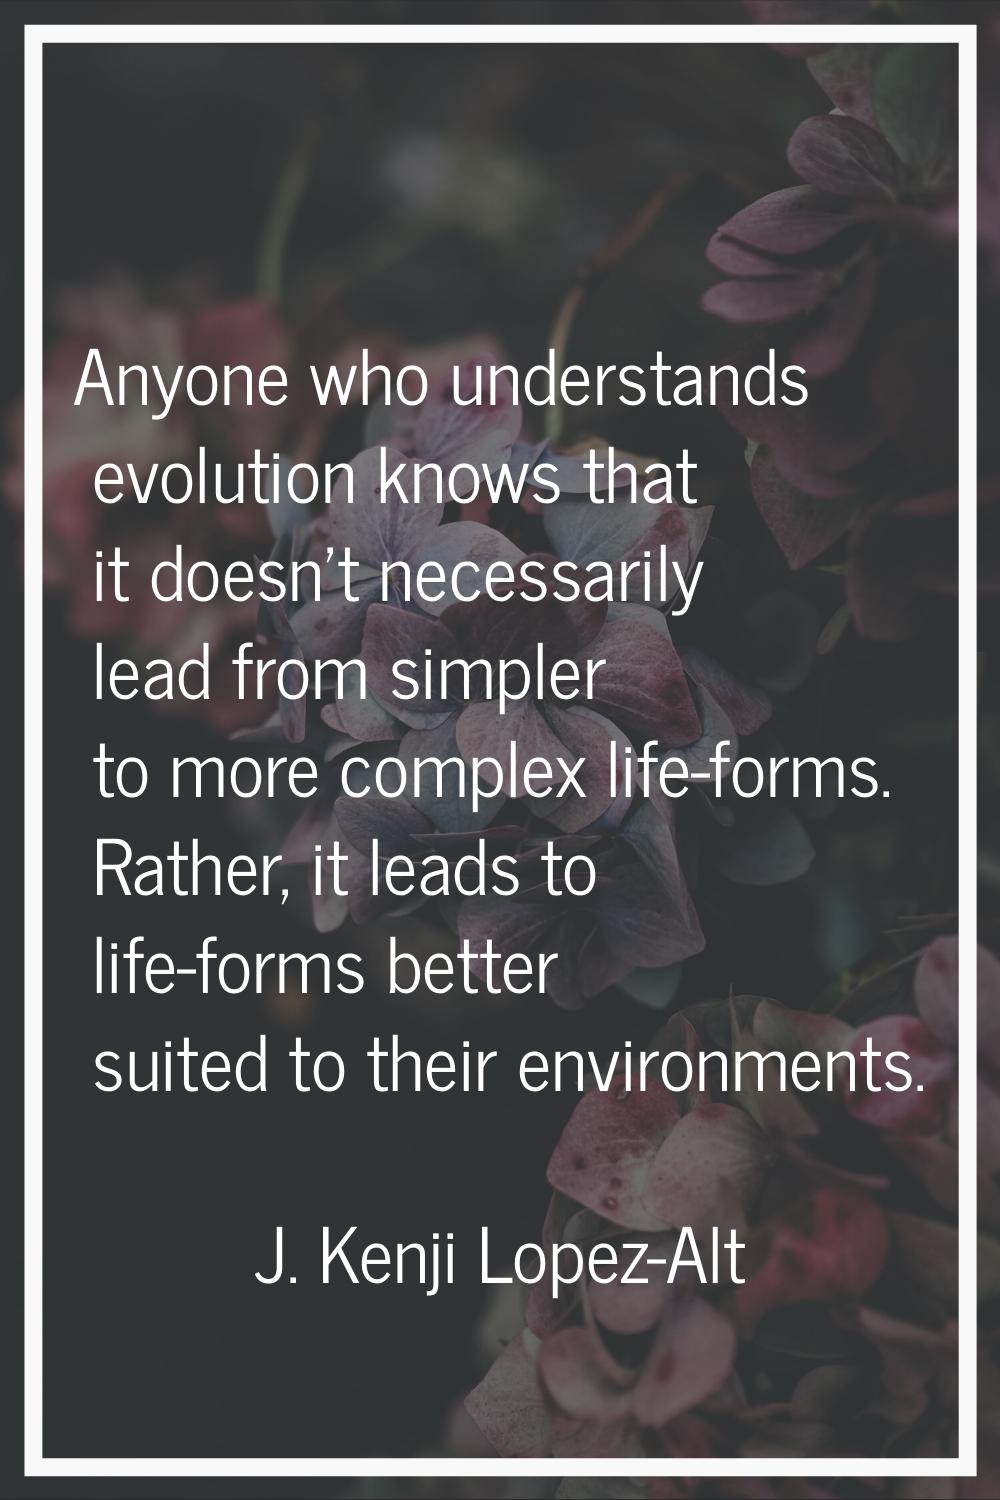 Anyone who understands evolution knows that it doesn't necessarily lead from simpler to more comple